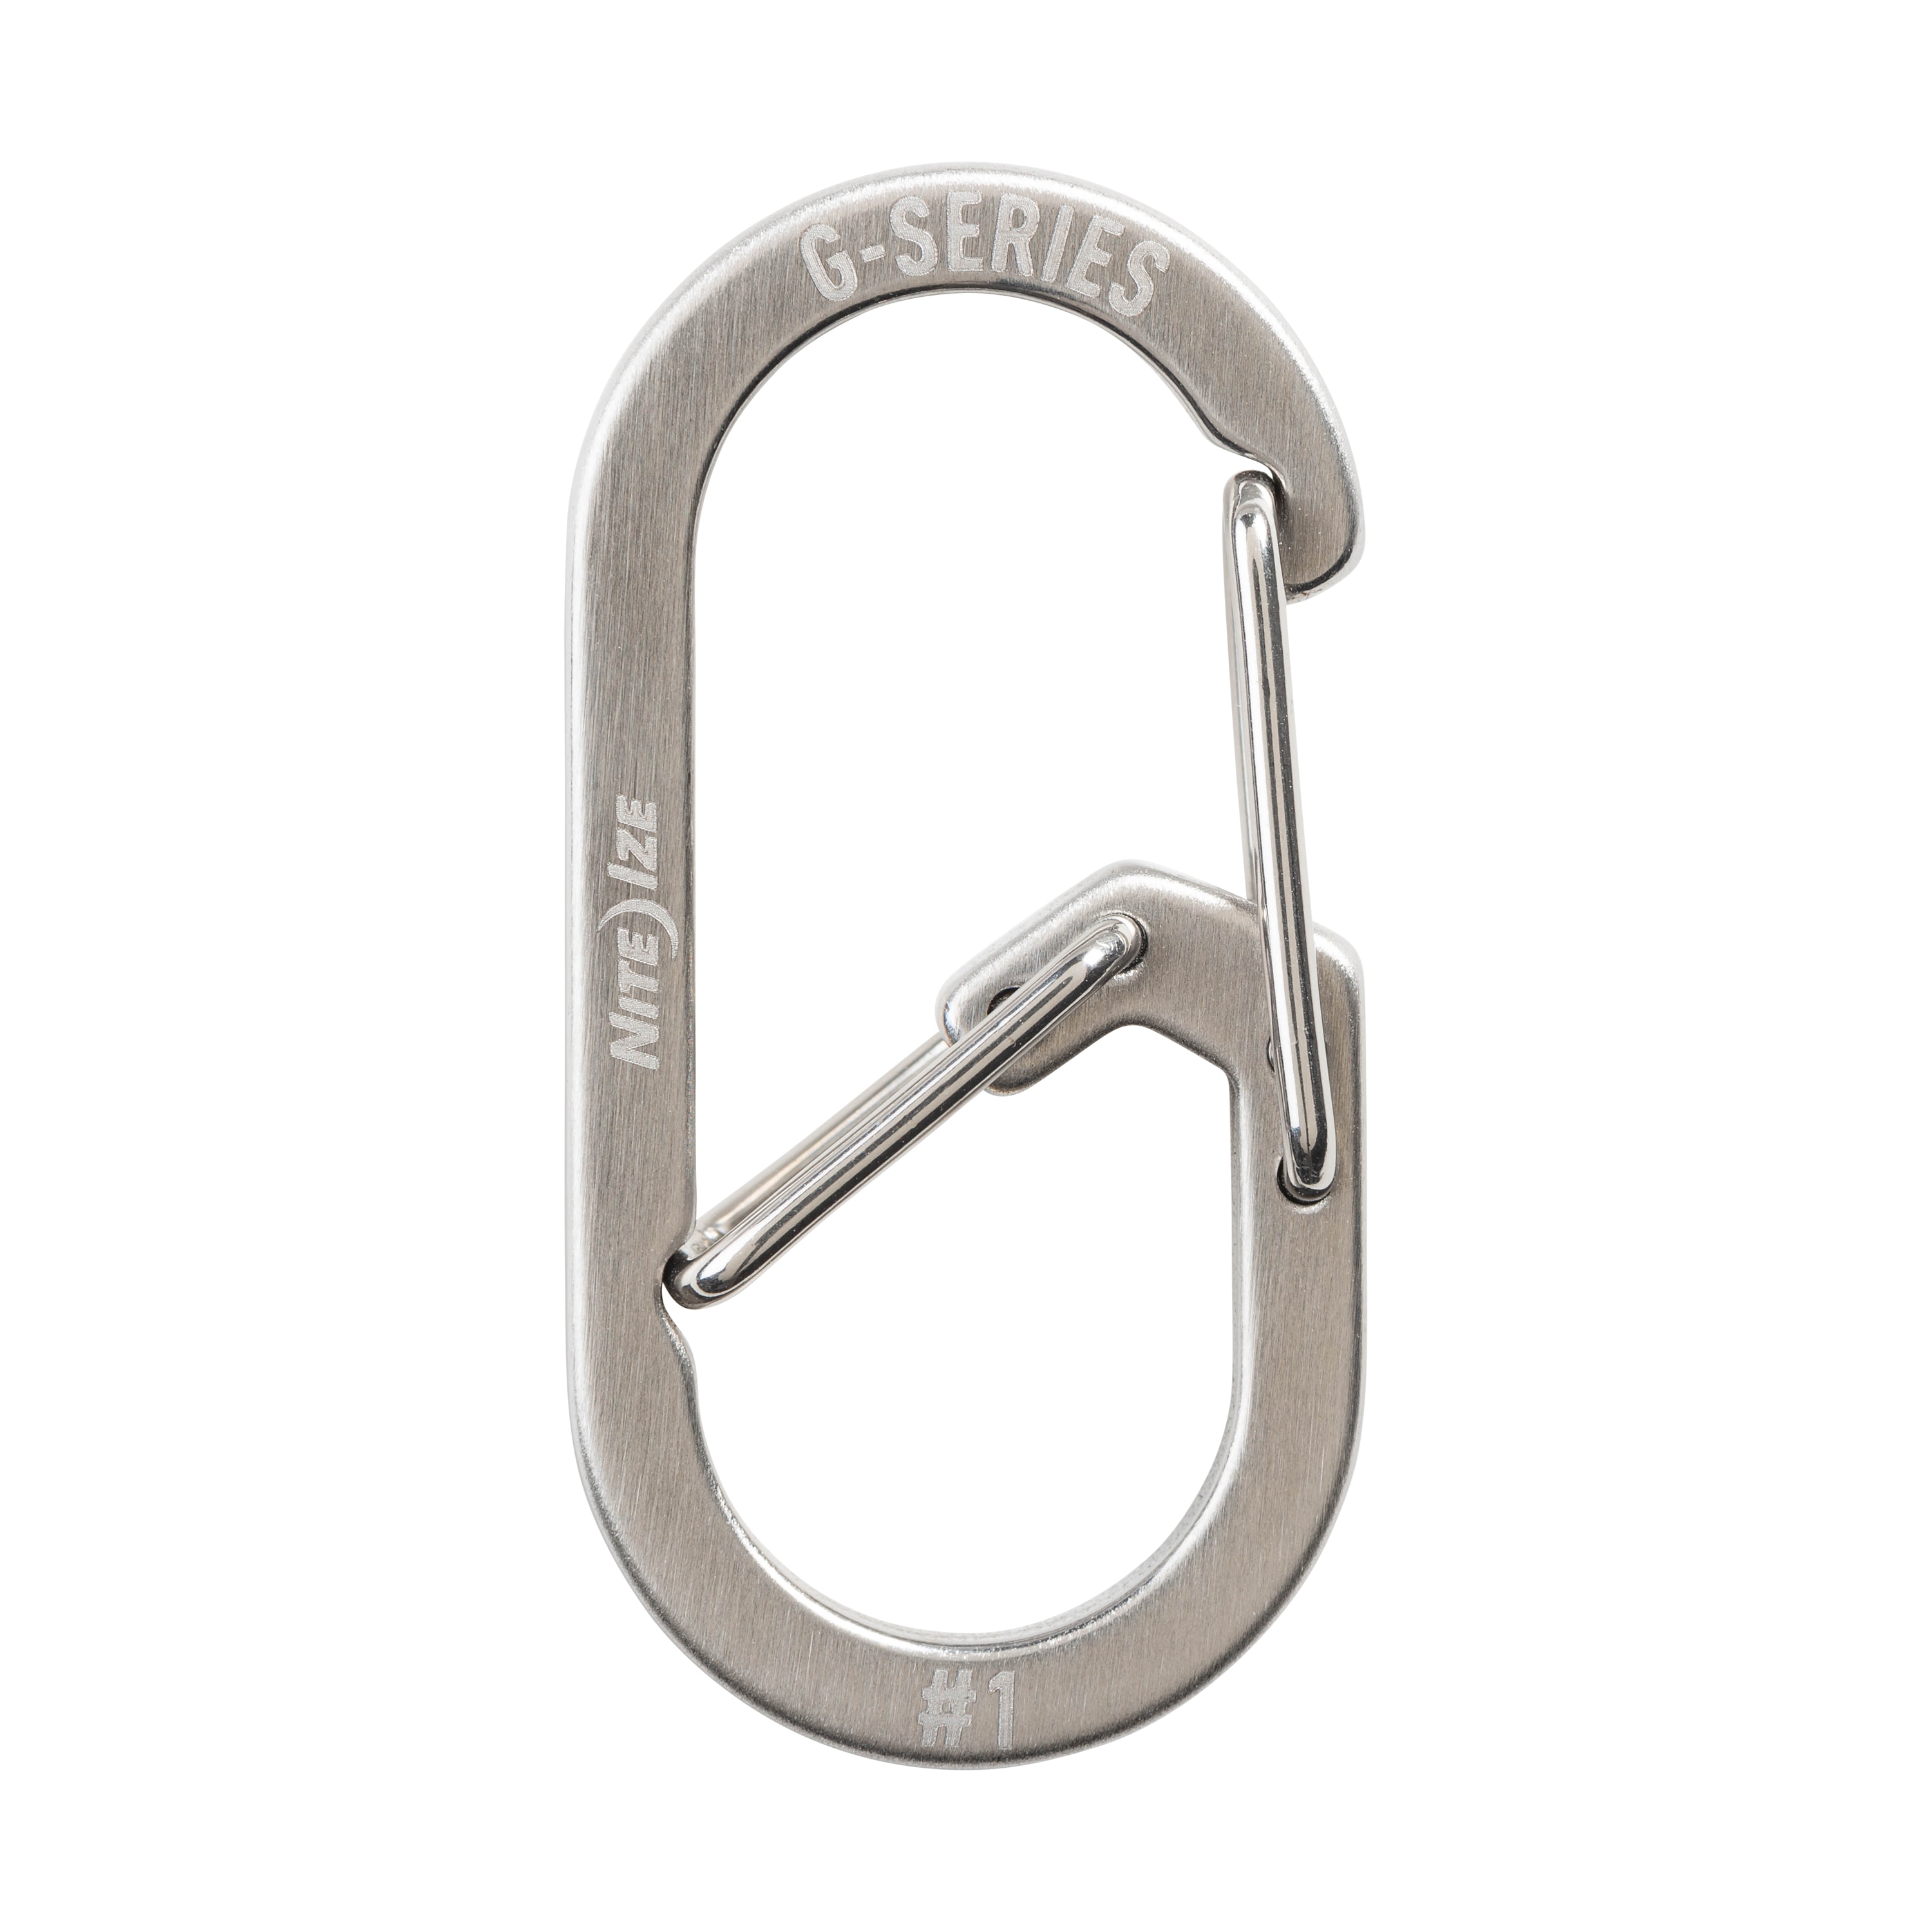 Nite Ize G-Series Dual Chamber Carabiner #1 | 2 Pack | Stainless Steel